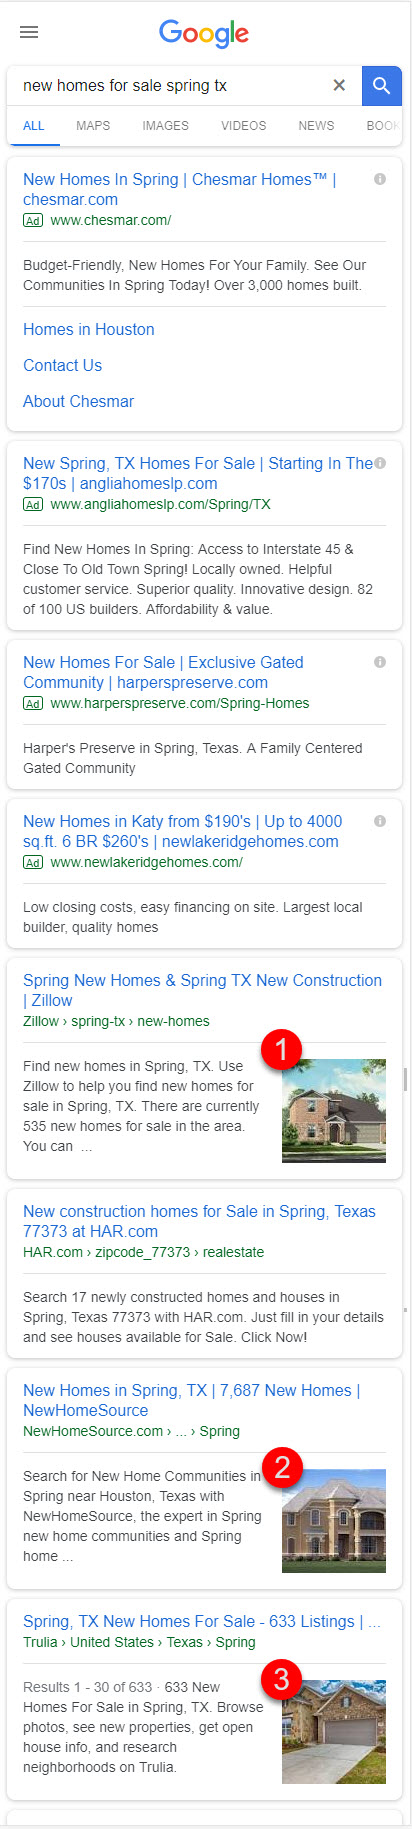 Local Search Image Thumbnails 2